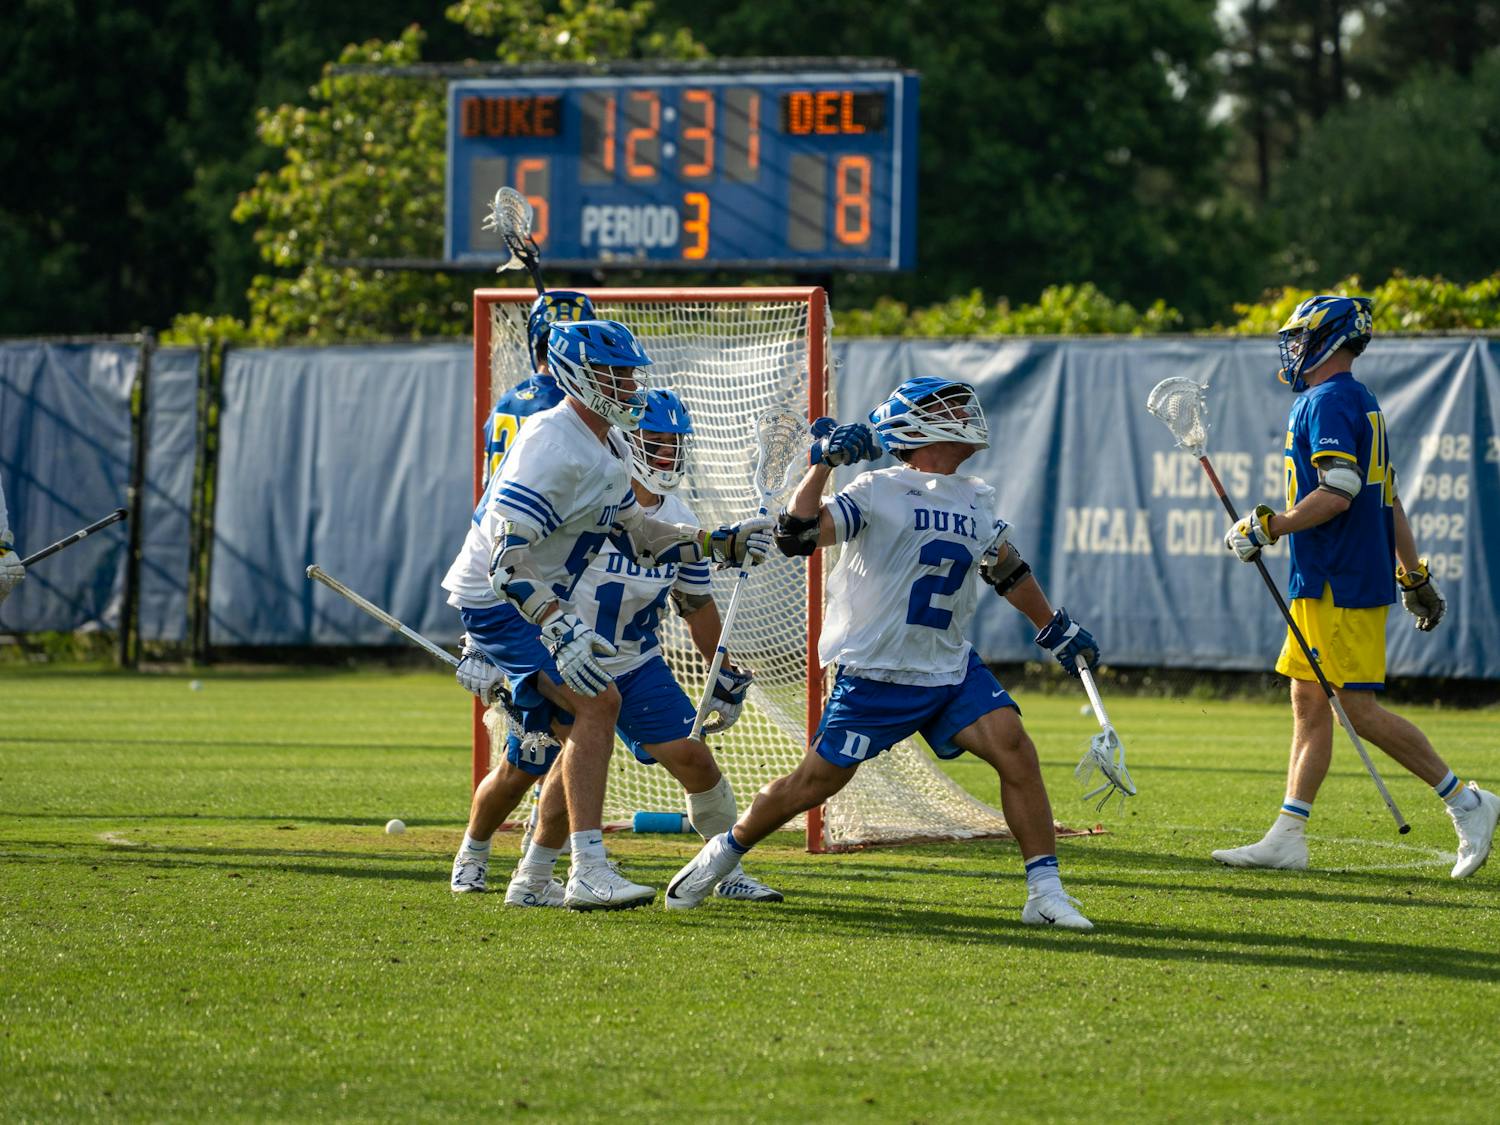 Sophomore attacker Andrew McAdorey (right) celebrates during Duke's opening-round victory against Delaware.